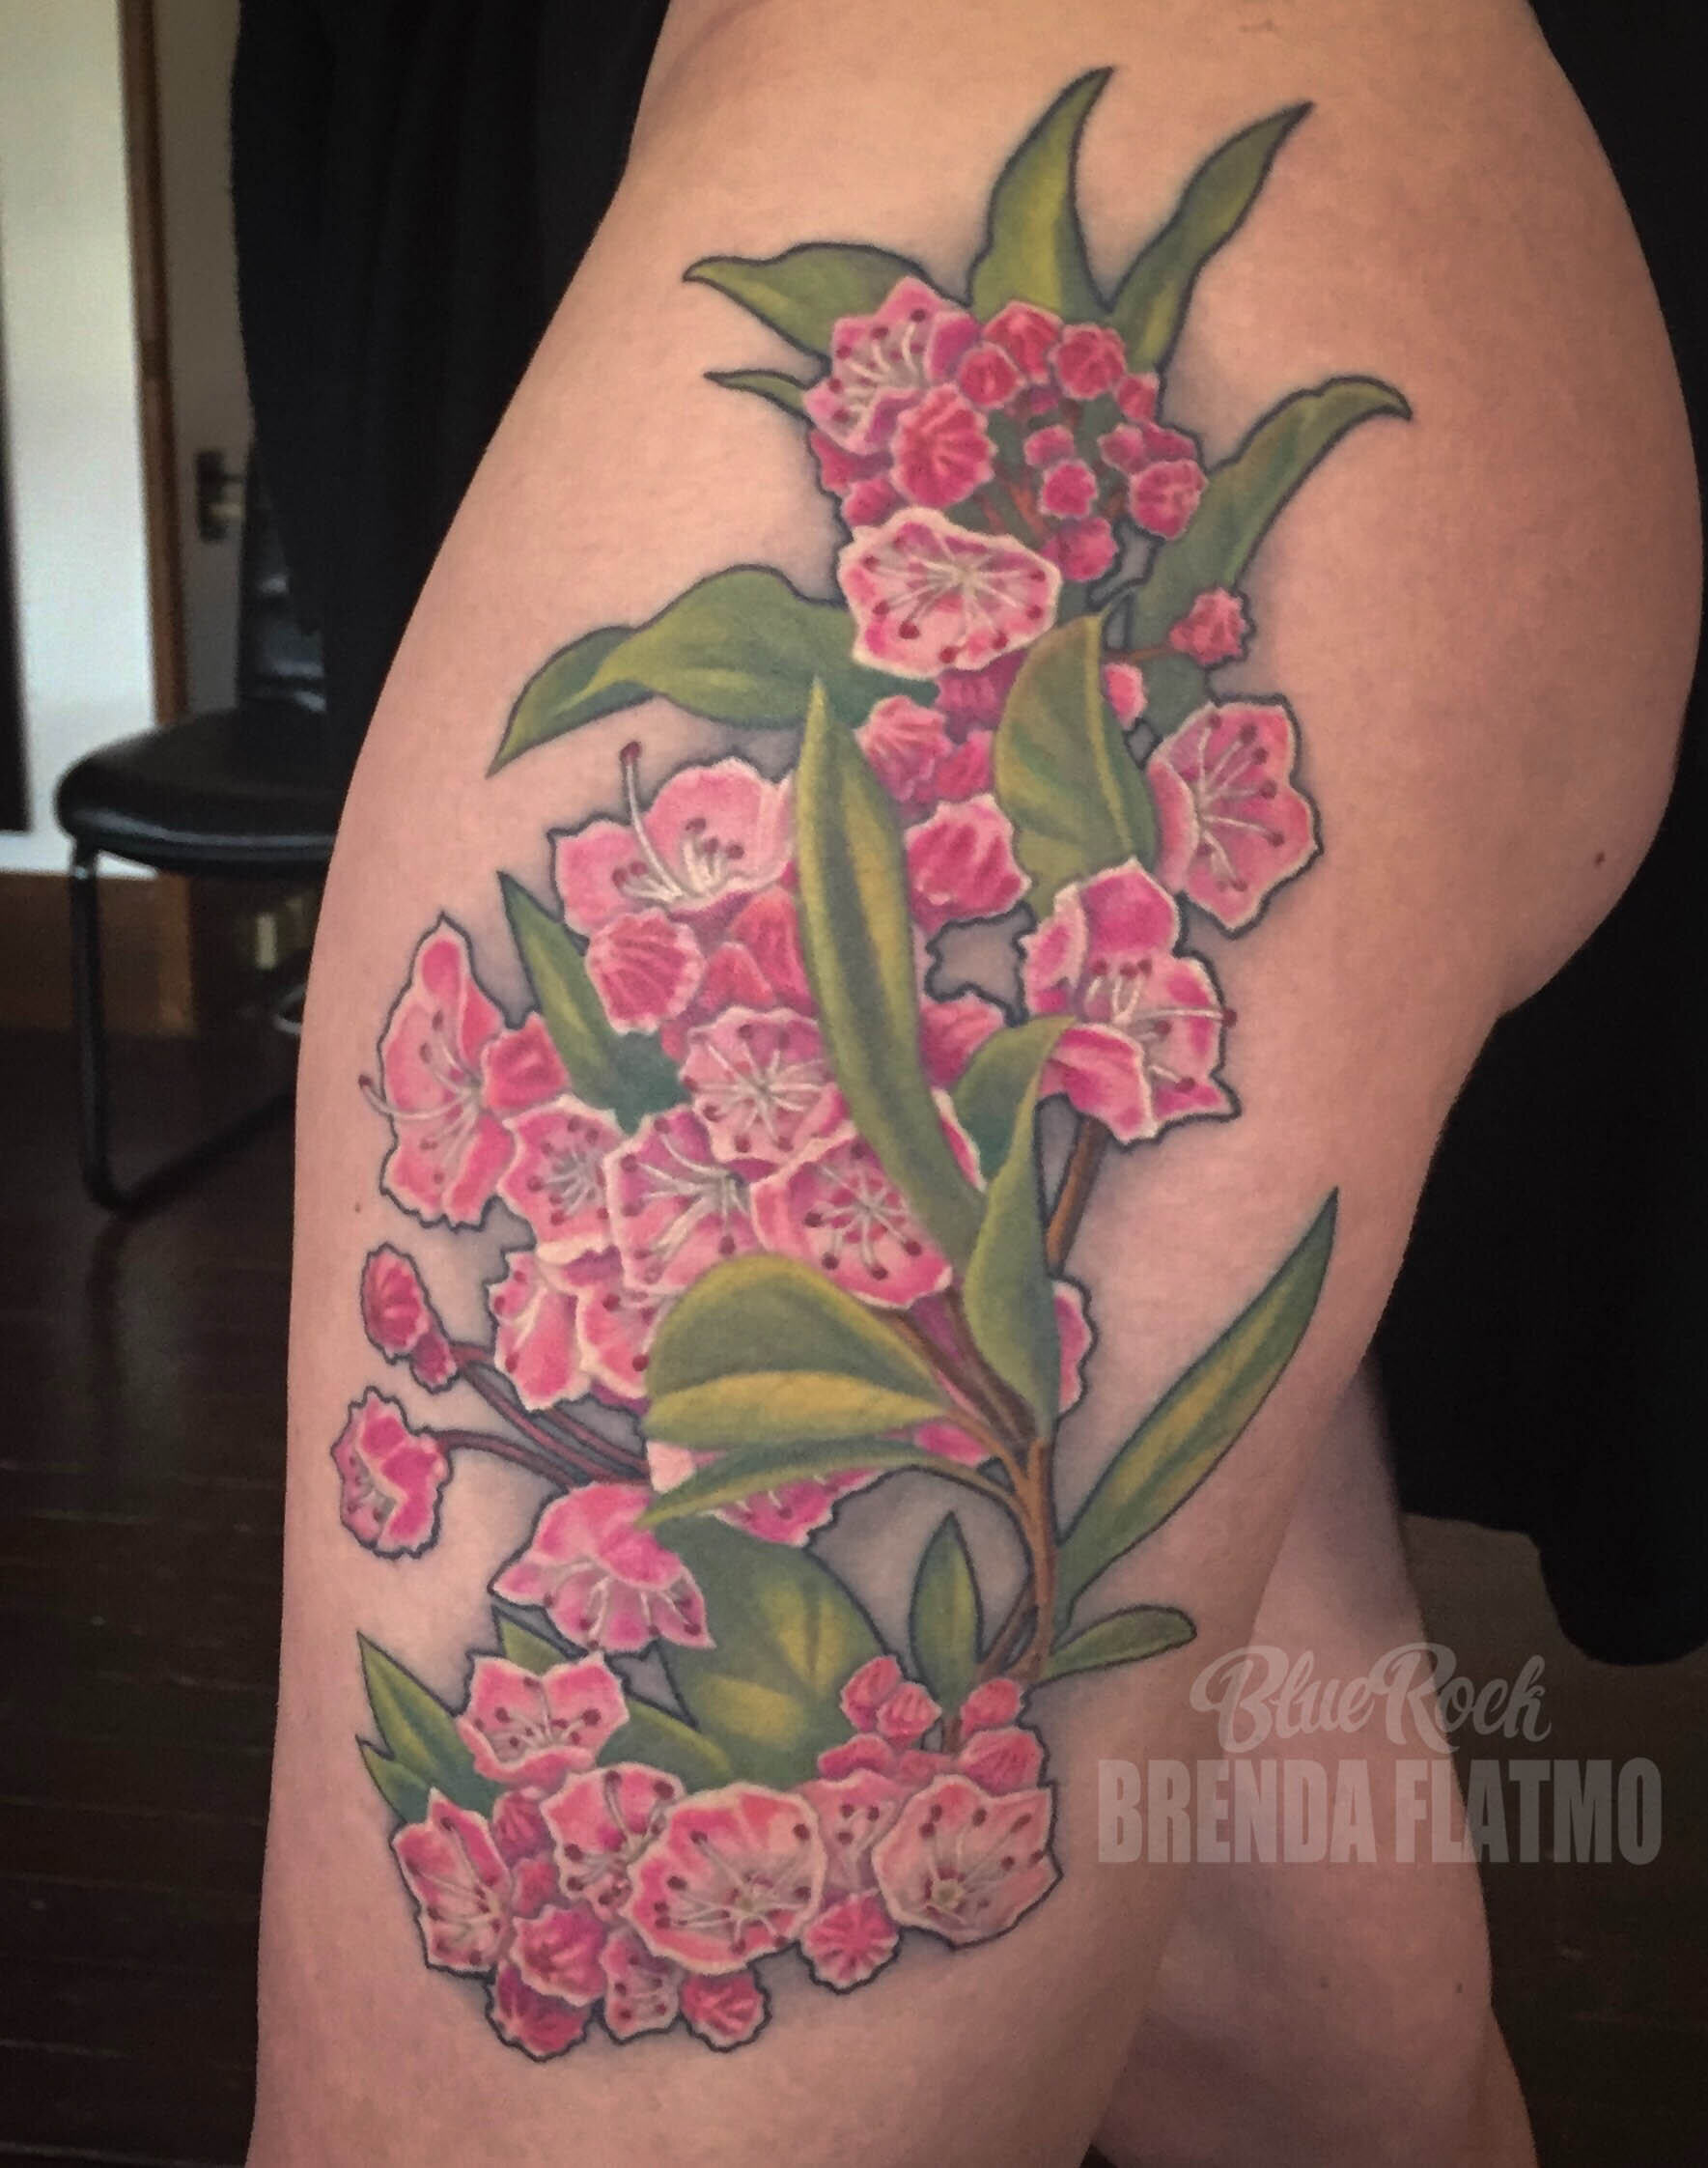 Rattlesnake and mountain laurel thanks so much Trish Check out her cool  herpetology art craftypants15 tattoo tattoos  Instagram